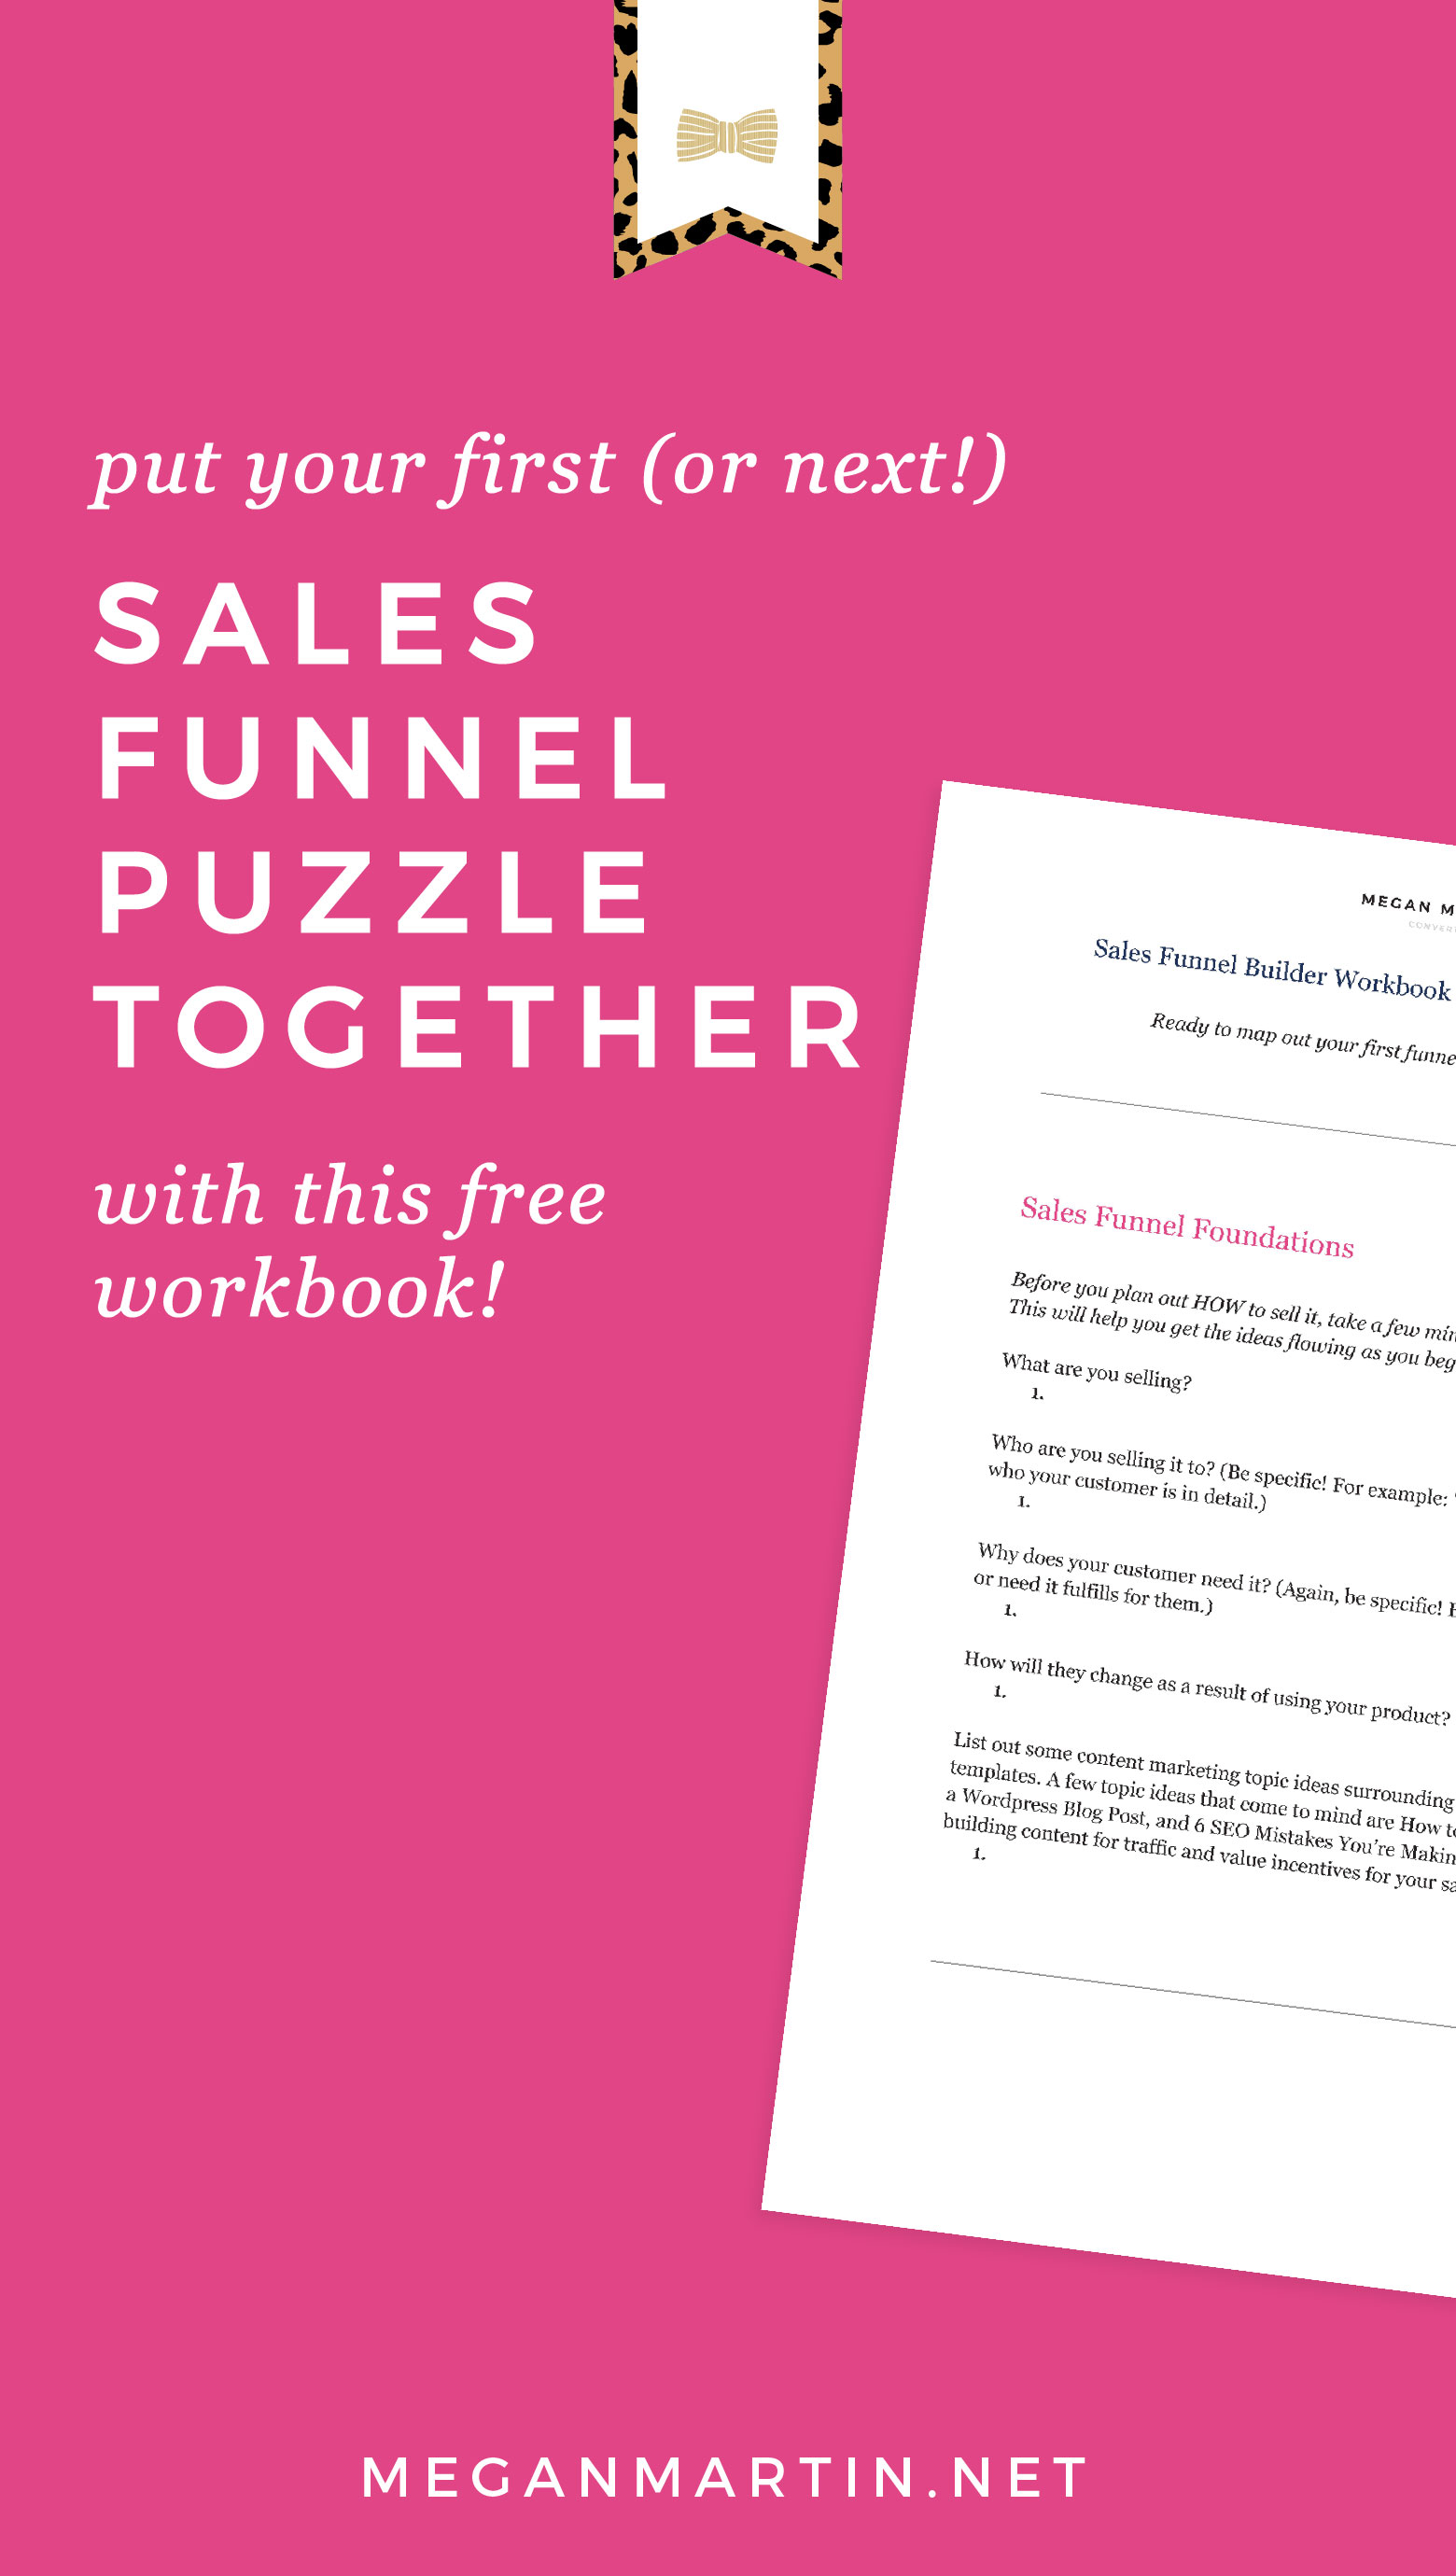 Put the Sales Funnel Puzzle together with this in-depth article explaining each step and free Sales Funnel Builder Workbook!